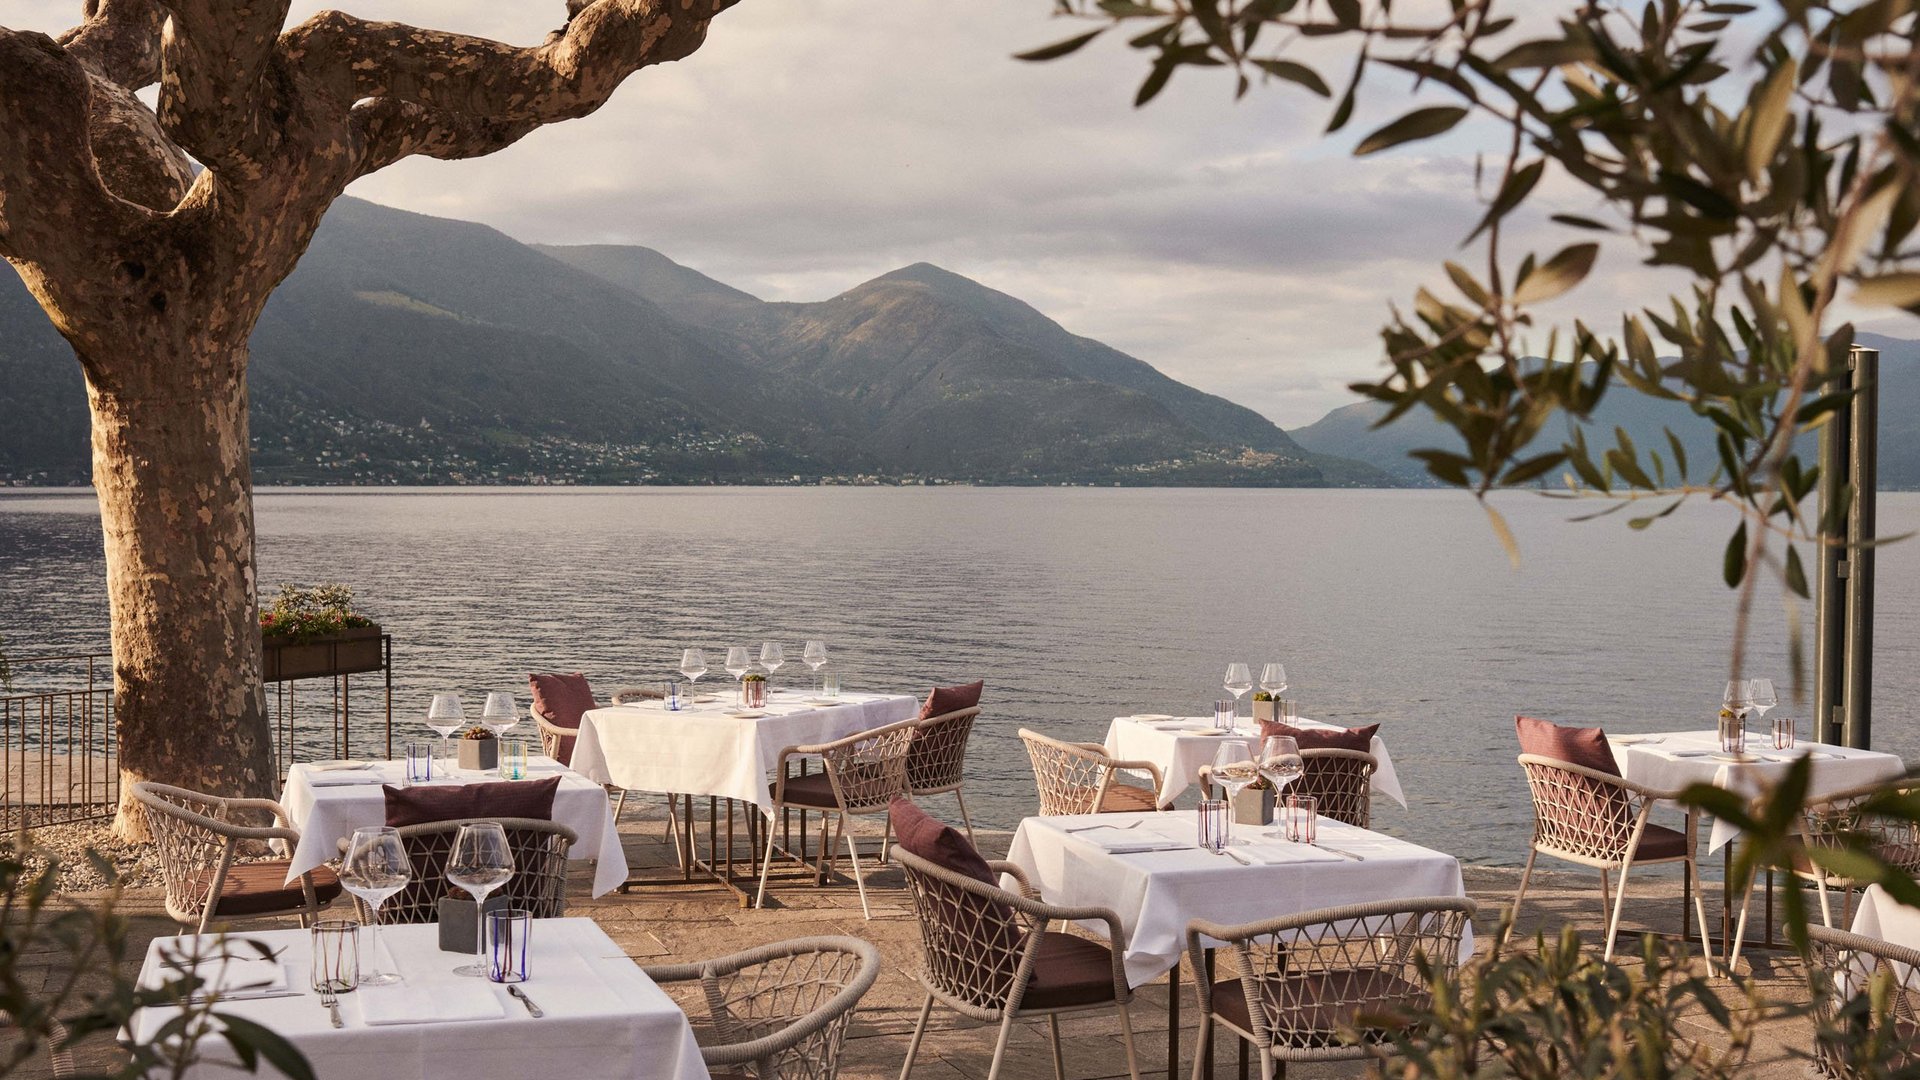 Your gourmet restaurant in Ascona. Directly by Lake Maggiore.